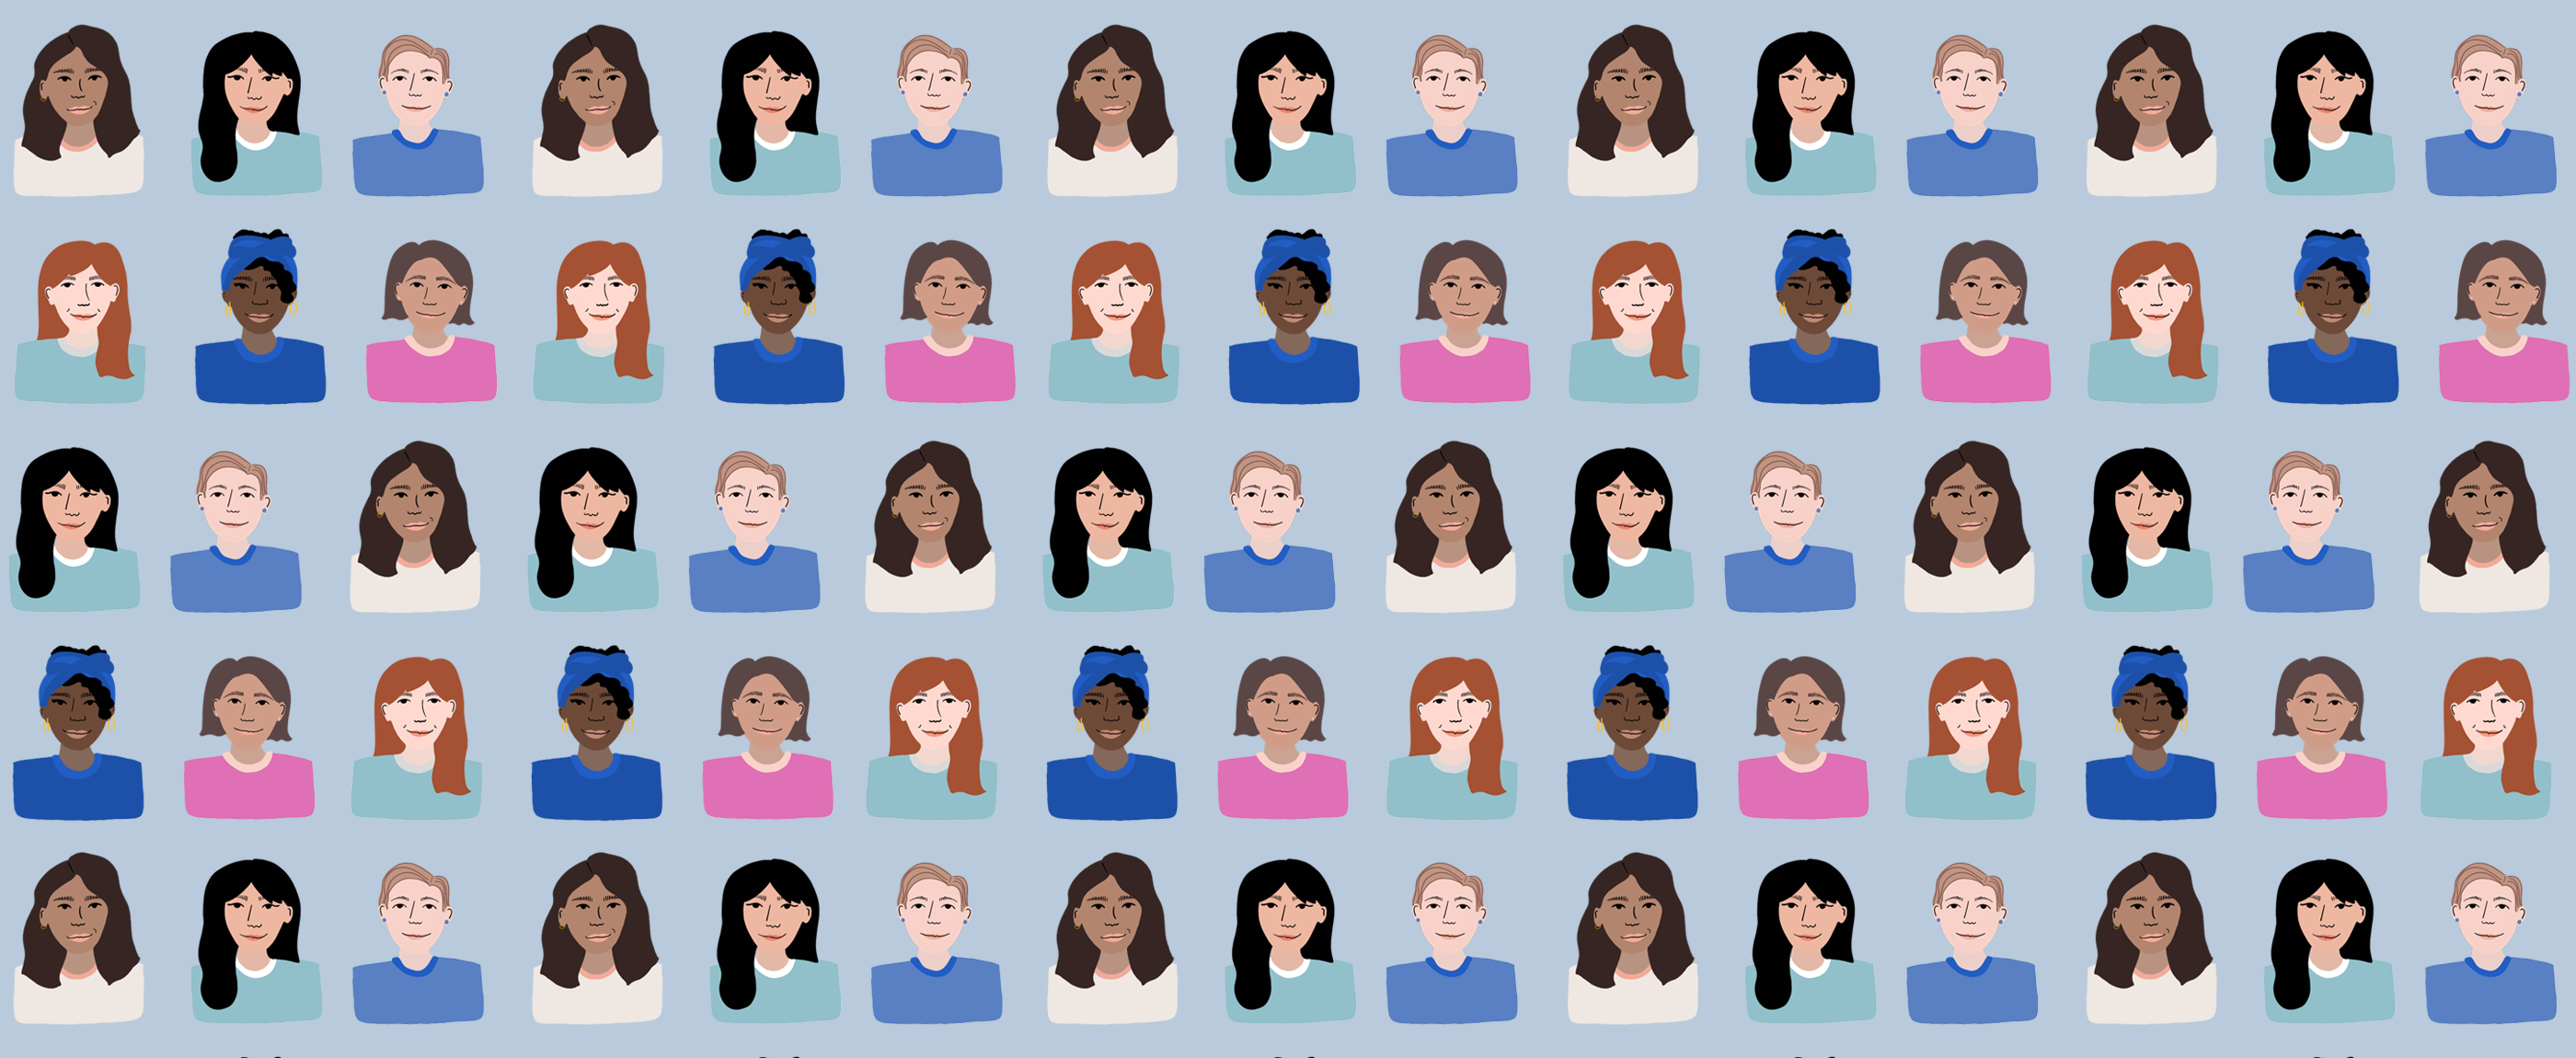 Read about How Marketers Should Create Content with Diversity and Inclusion in Mind, on PLANOLY